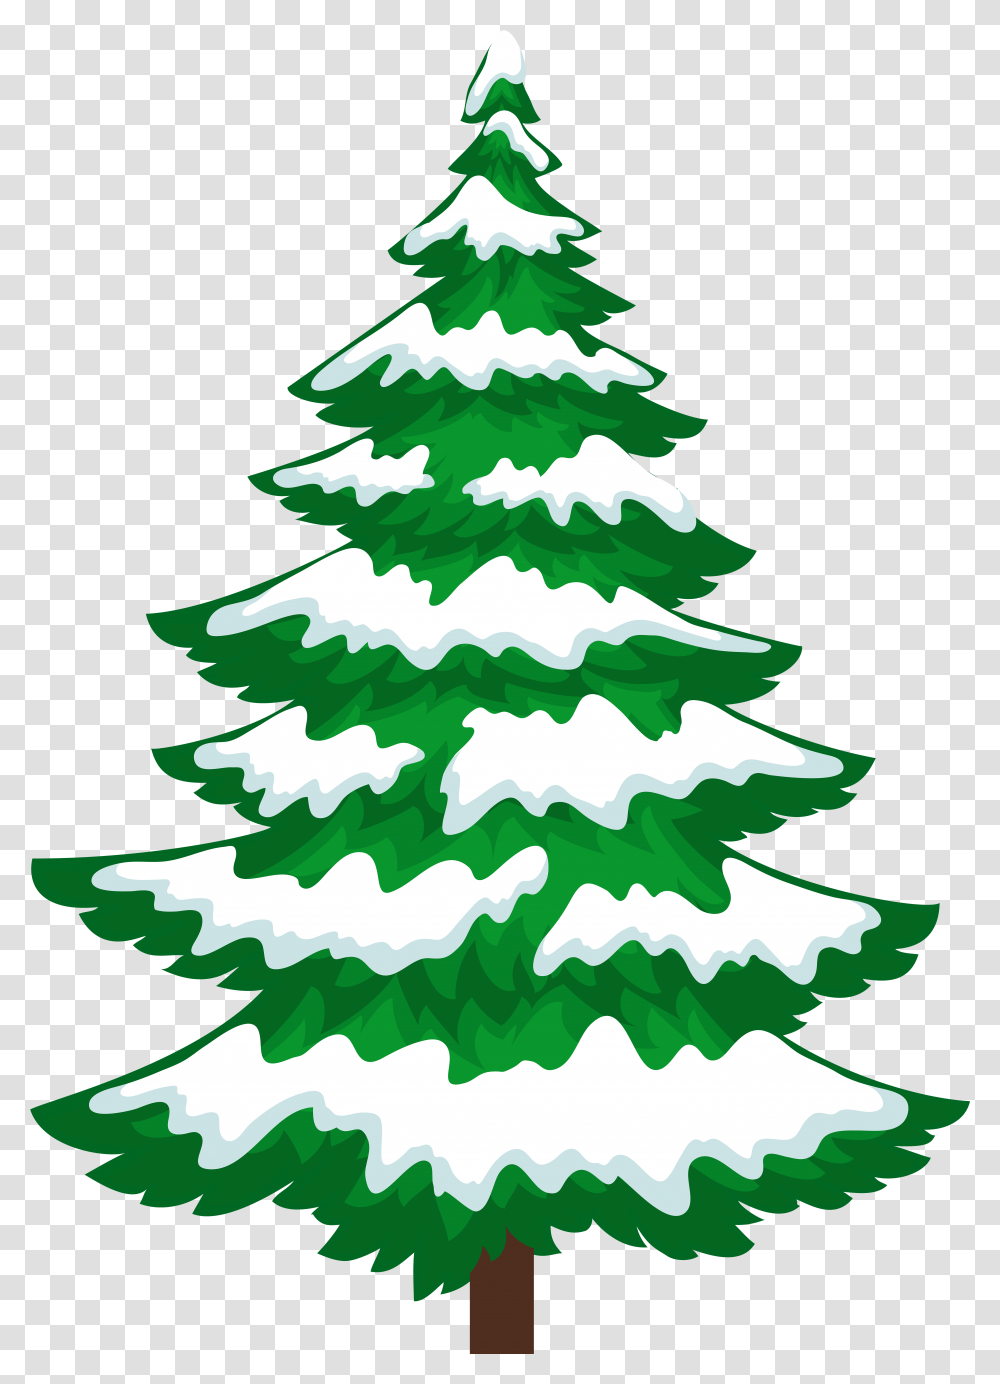 Library Of Pine Tree Clip Art Freeuse Download Snowy Christmas Tree Clipart, Plant, Ornament Transparent Png